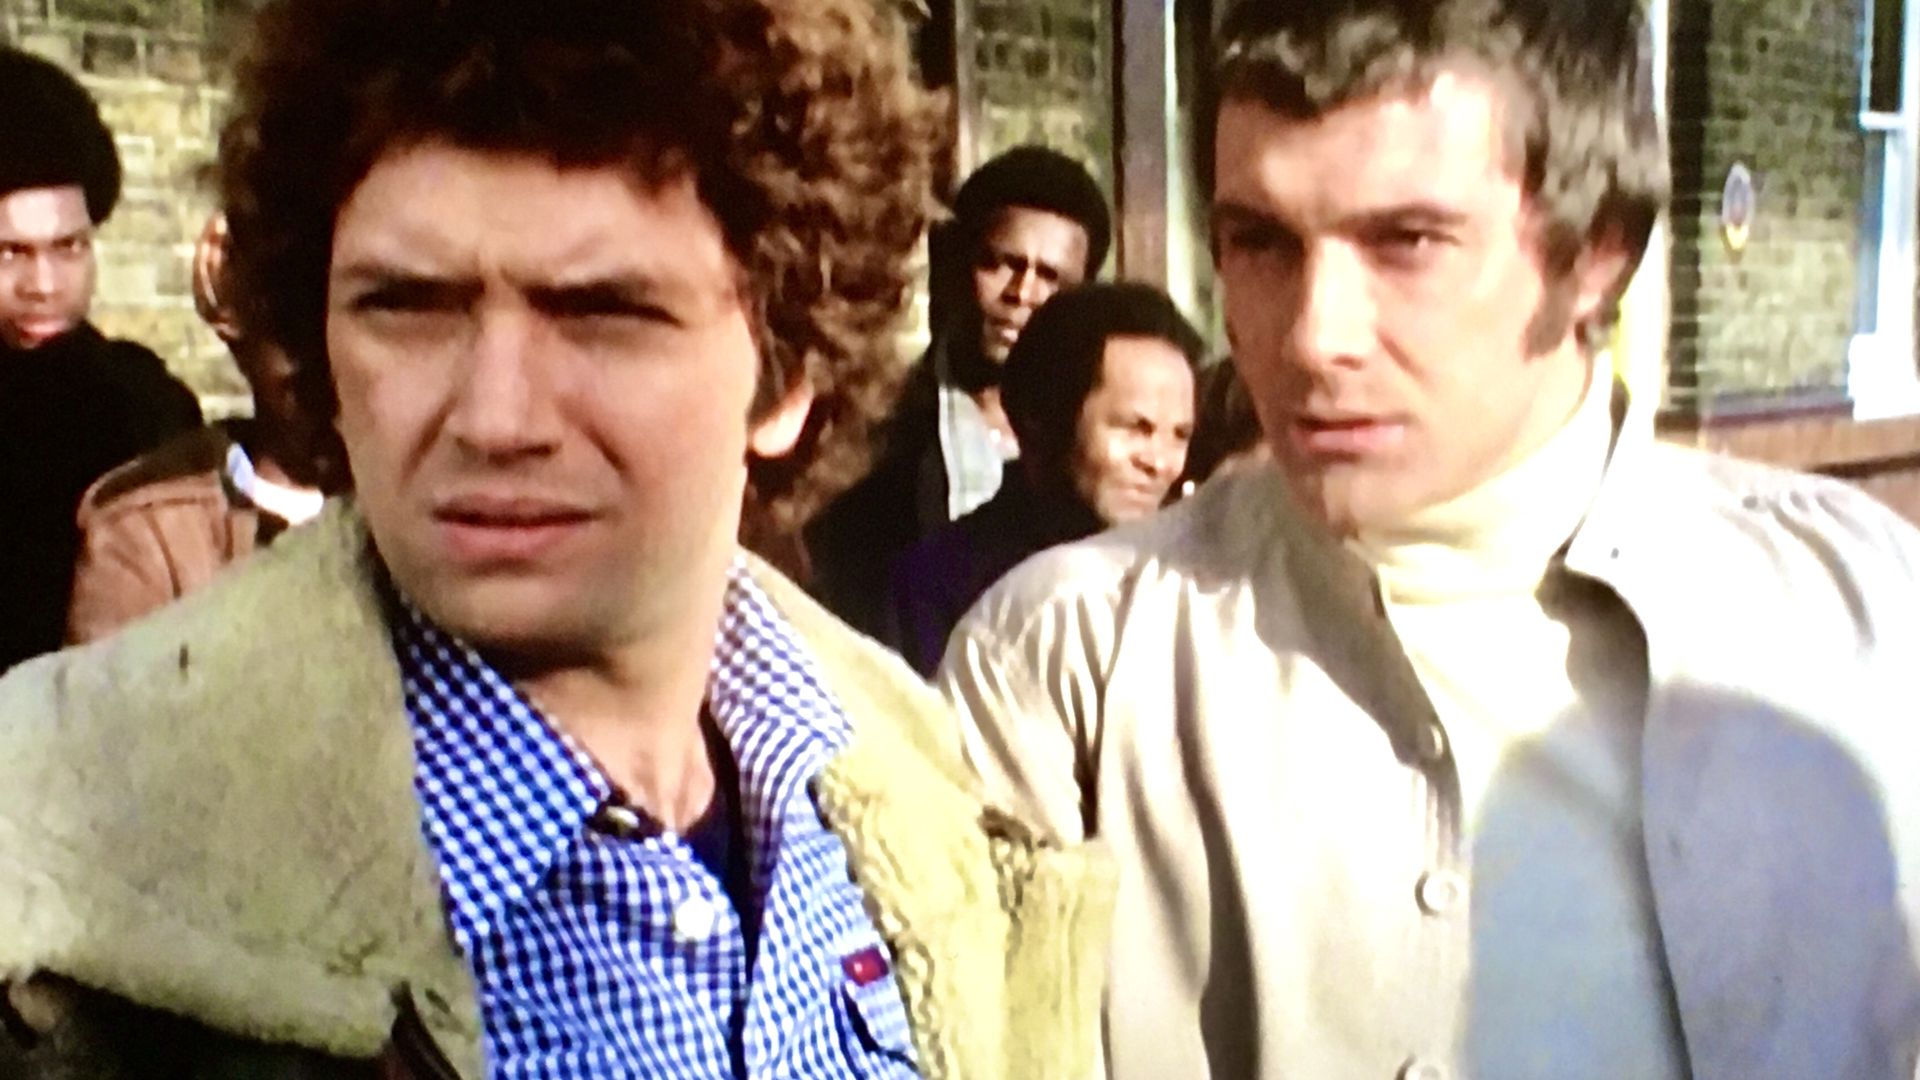 The Professionals background